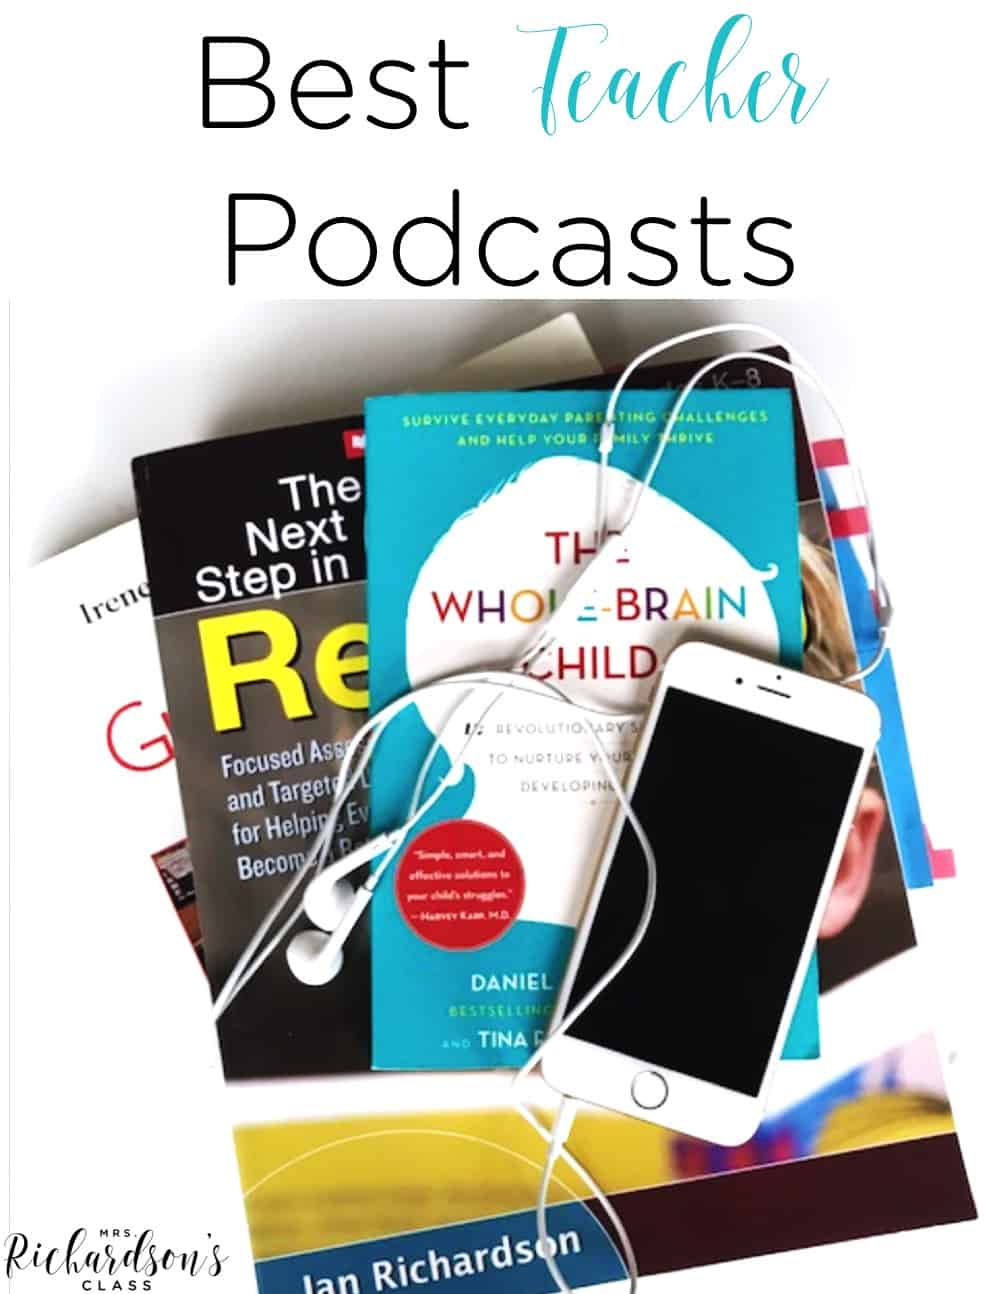 Looking for a little professional development on the go? Check out these top teacher podcasts! I love getting teaching tips, updates in the education world, and new ideas. Podcasts for teachers are a fun way to do just that!